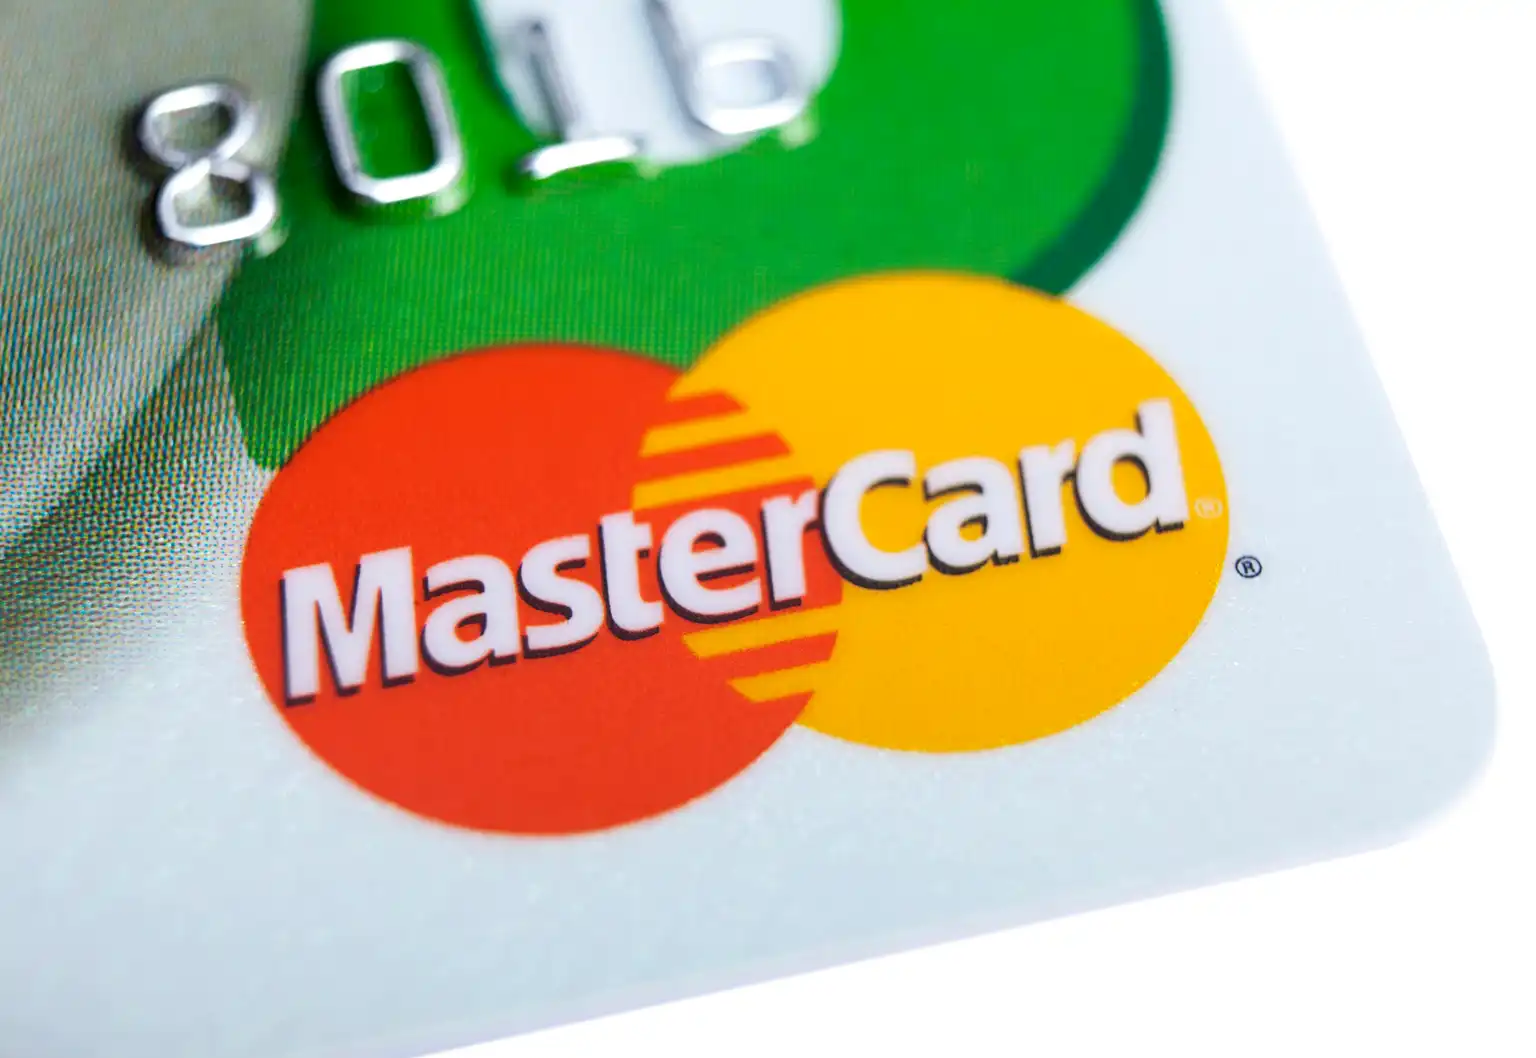 Why Mastercard Stock Could Be 20% Undervalued - Seeking Alpha